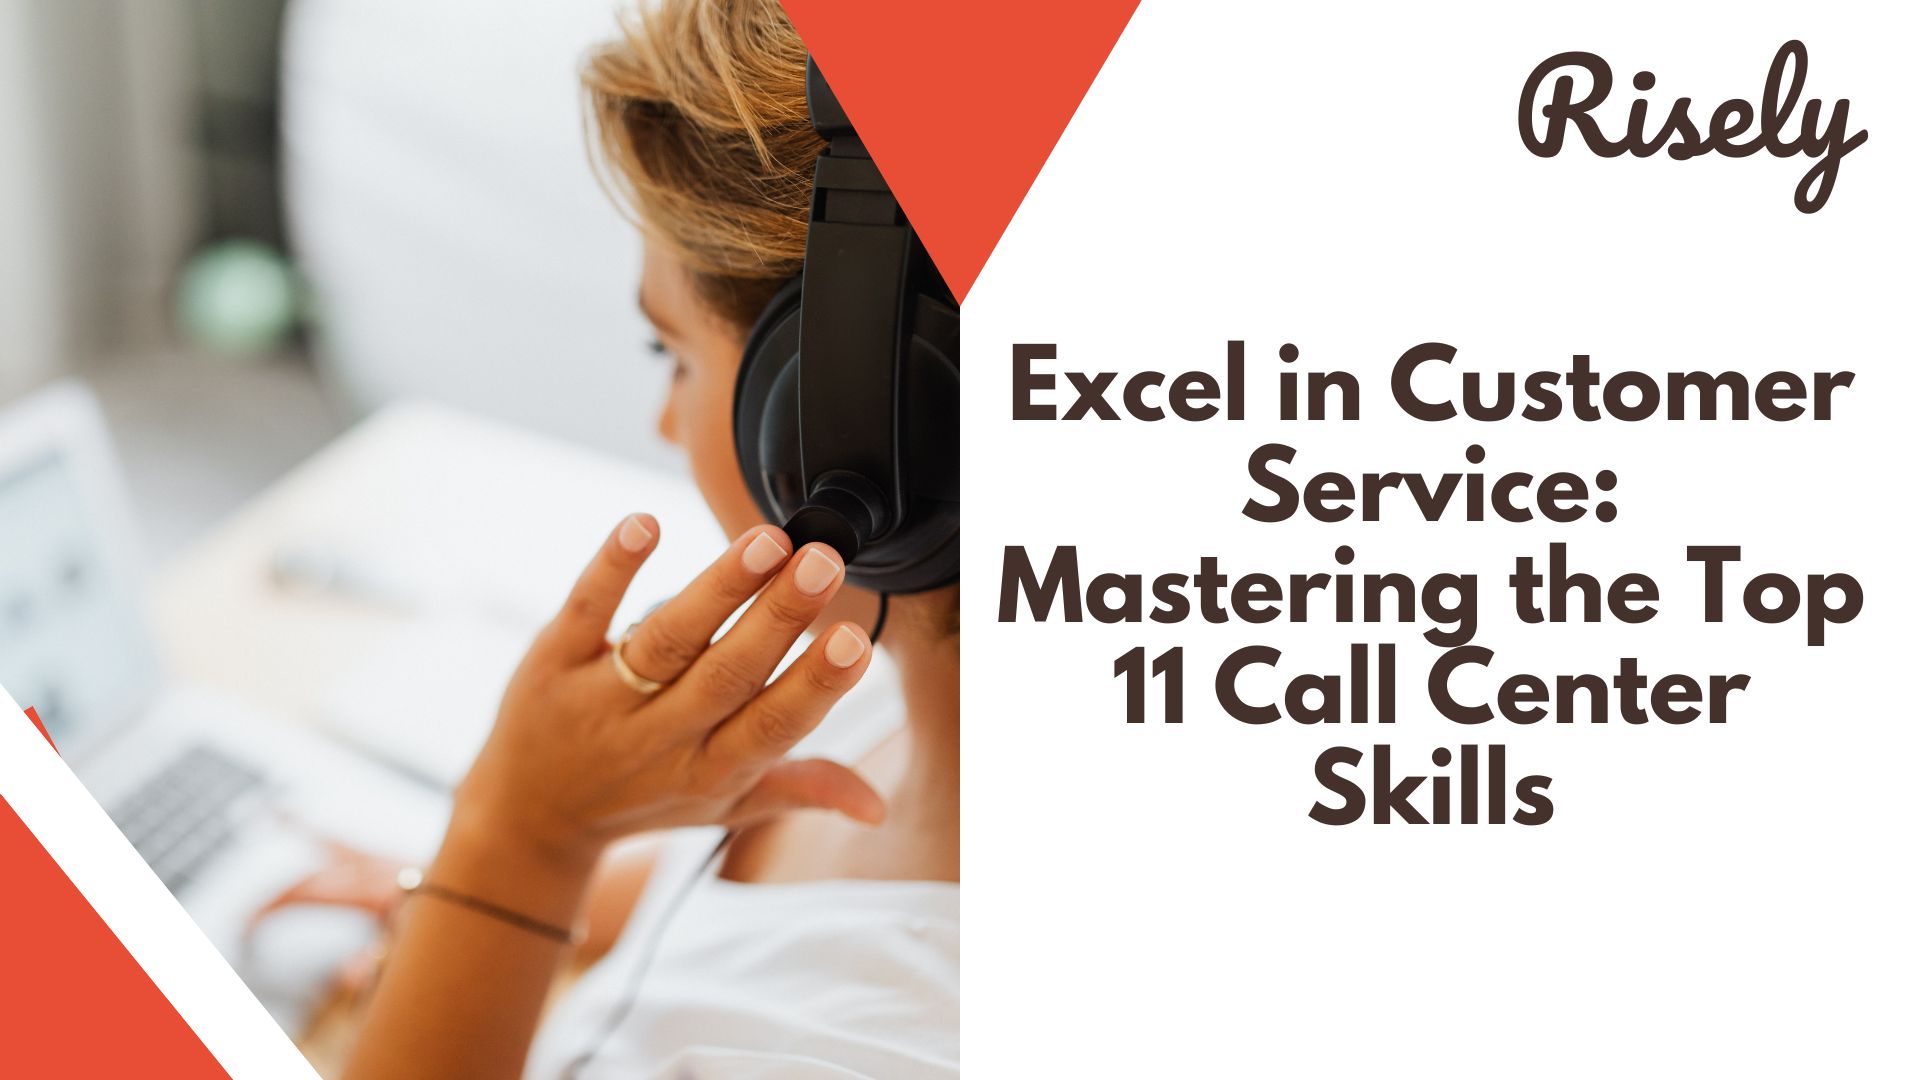 Excel in Customer Service: Mastering the Top 11 Call Center Skills